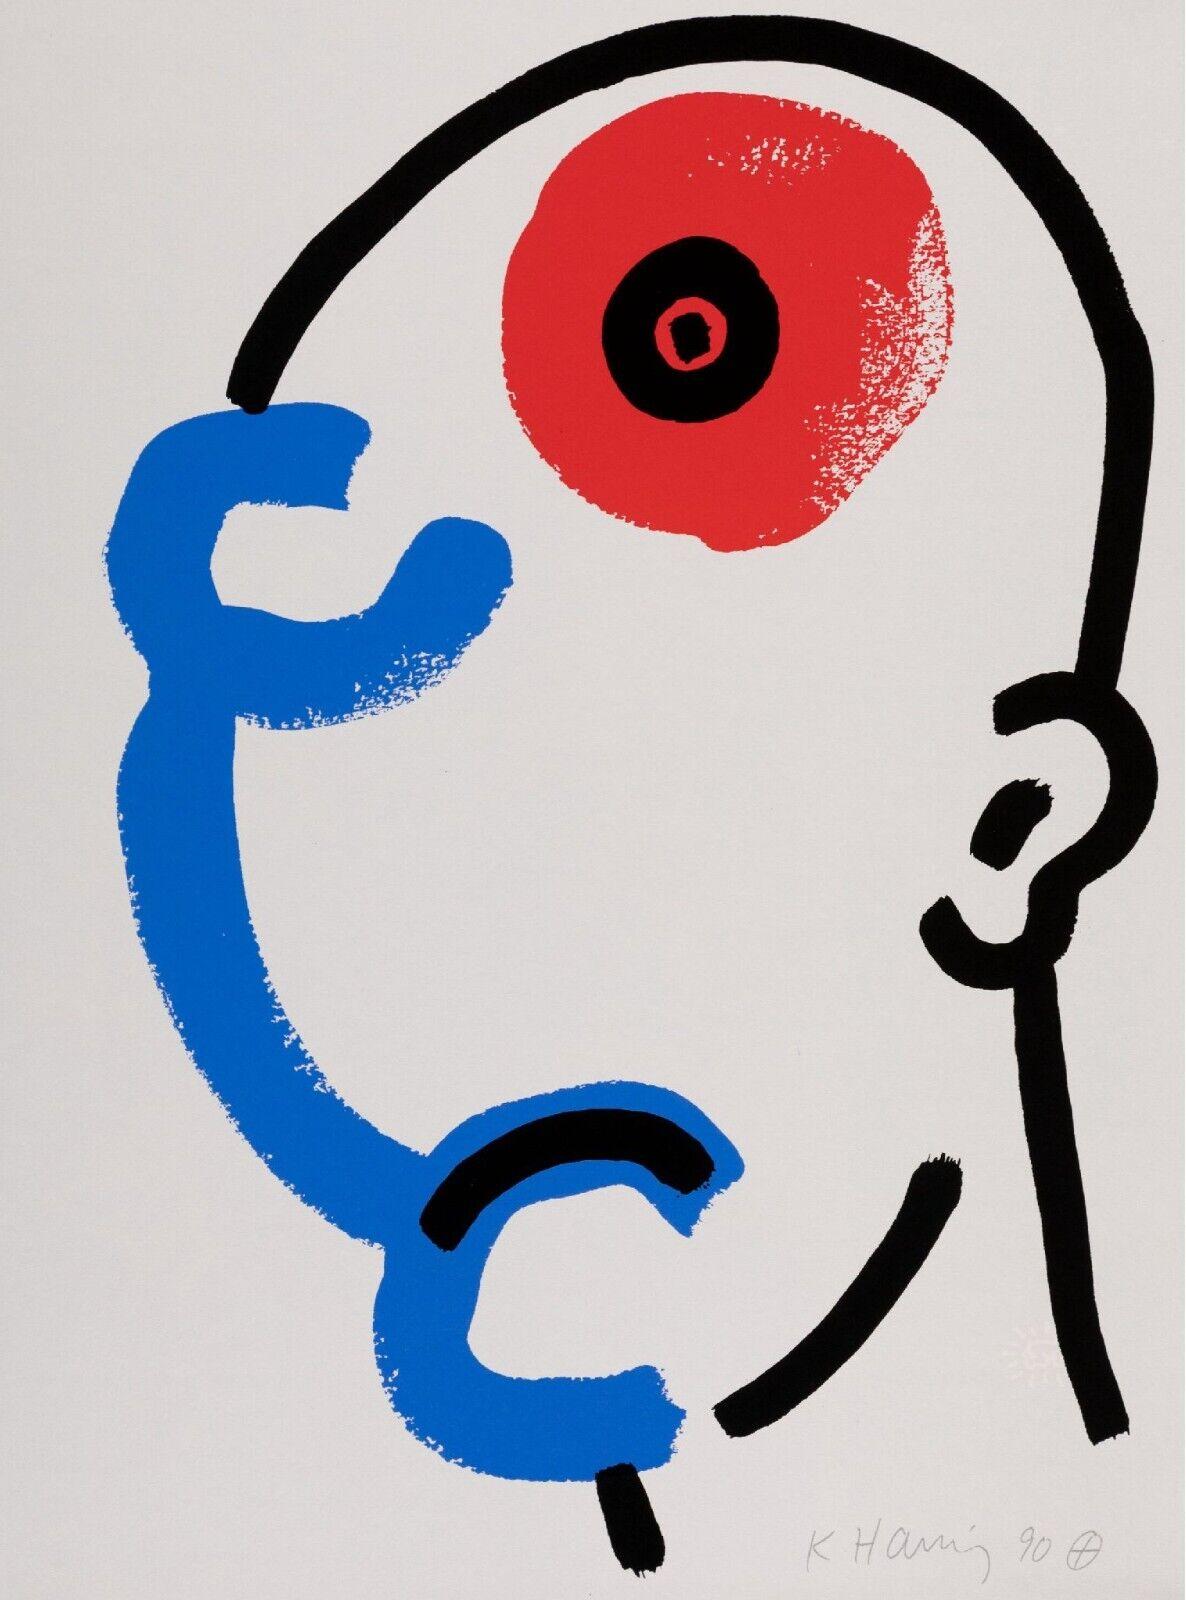 Artist: Keith Haring
Title: Untitled  (Story of Red and Blue)
Edition: Numbered From the limited edition of 90
Medium: Original serigraph in colors paper
Year: 1989-1990
Signature: Signed in plate by Haring, signed in pencil by Julian Gruen, the